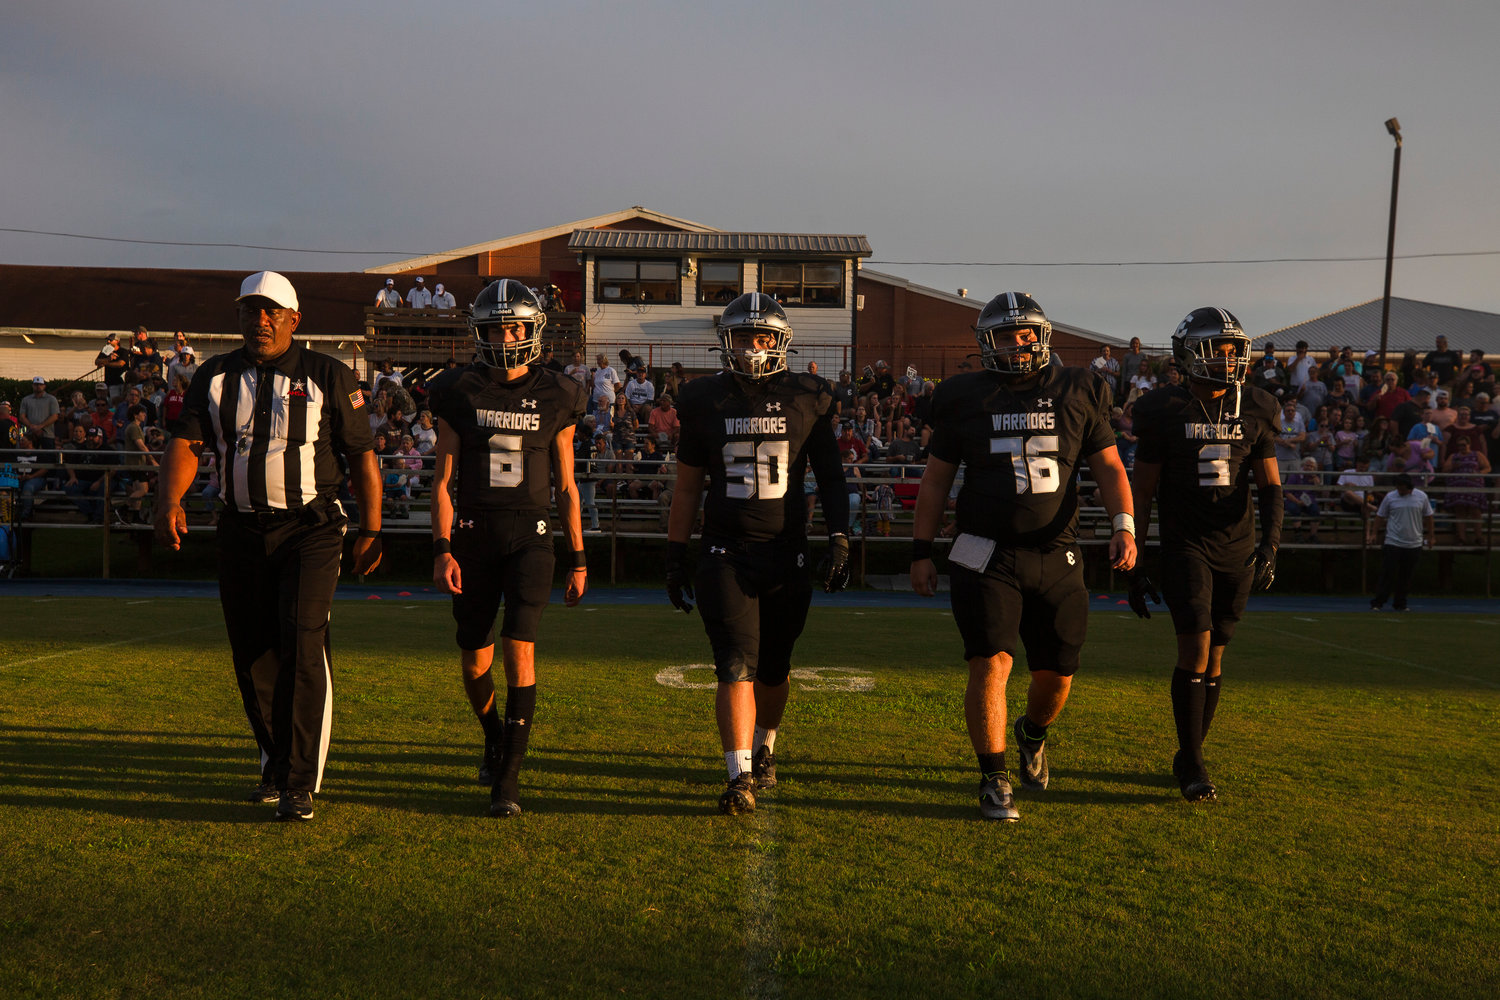 Elberta’s Cason White (76) was joined by classmates Hunter Powers (6), Jared Fralick (50) and Tyshaun Washington (3) in walking out for the coin toss ahead of the Warriors’ season-opening contest against the Bayside Academy Admirals Aug. 19. White was named an all-state honorable mention and became the second Elberta player recognized by the Alabama Sports Writers Association.